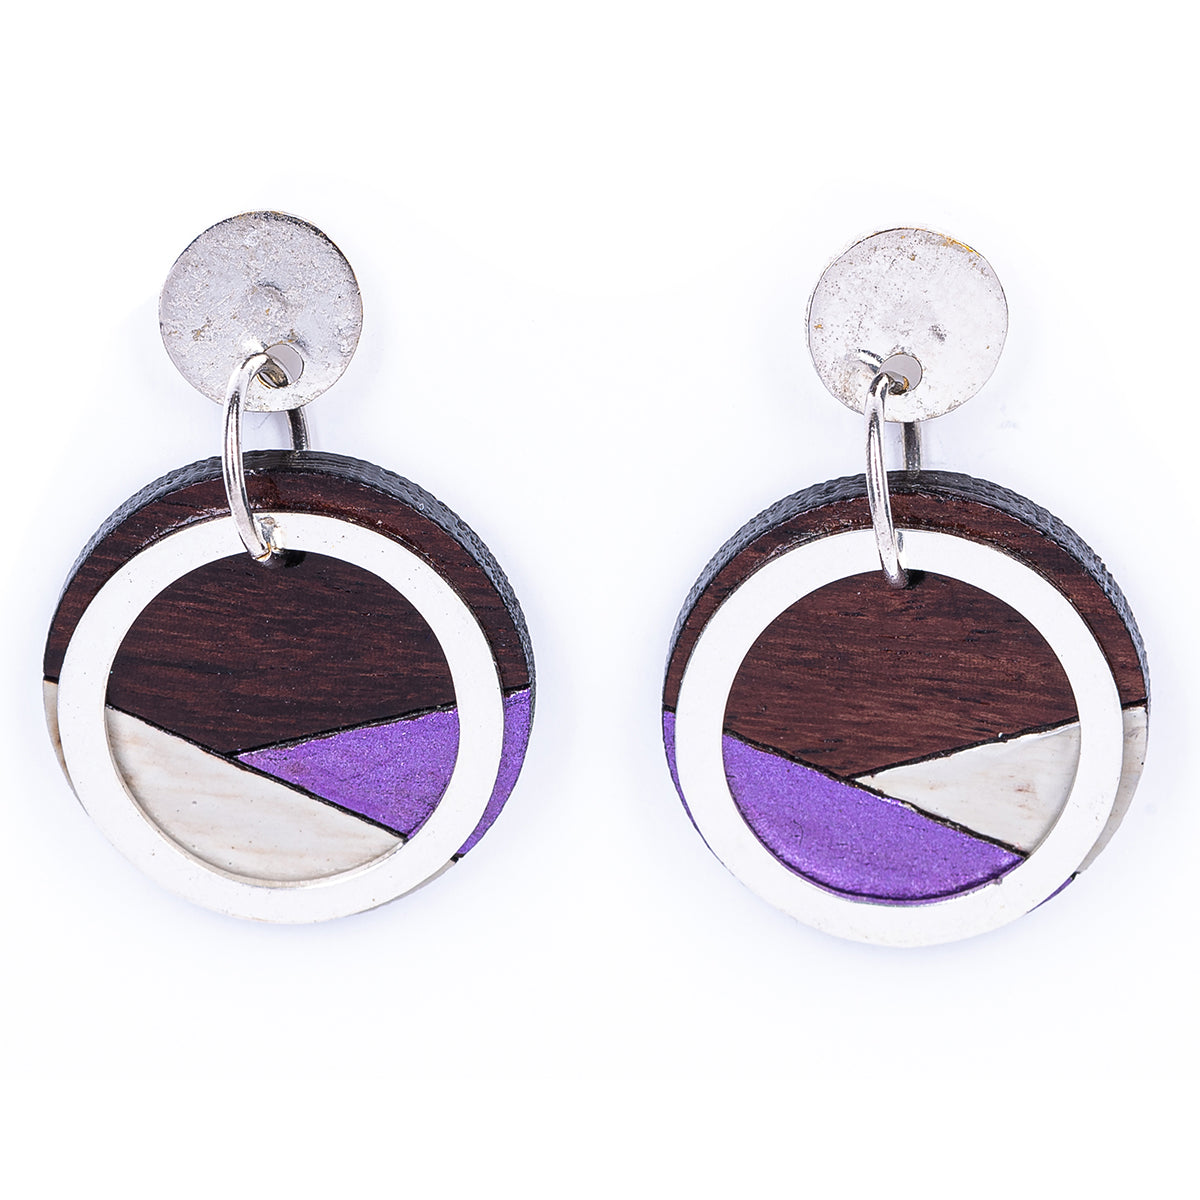 Conture Recycled Wood Sterling Silver Earrings (6 colours available) by Paguro Upcycle